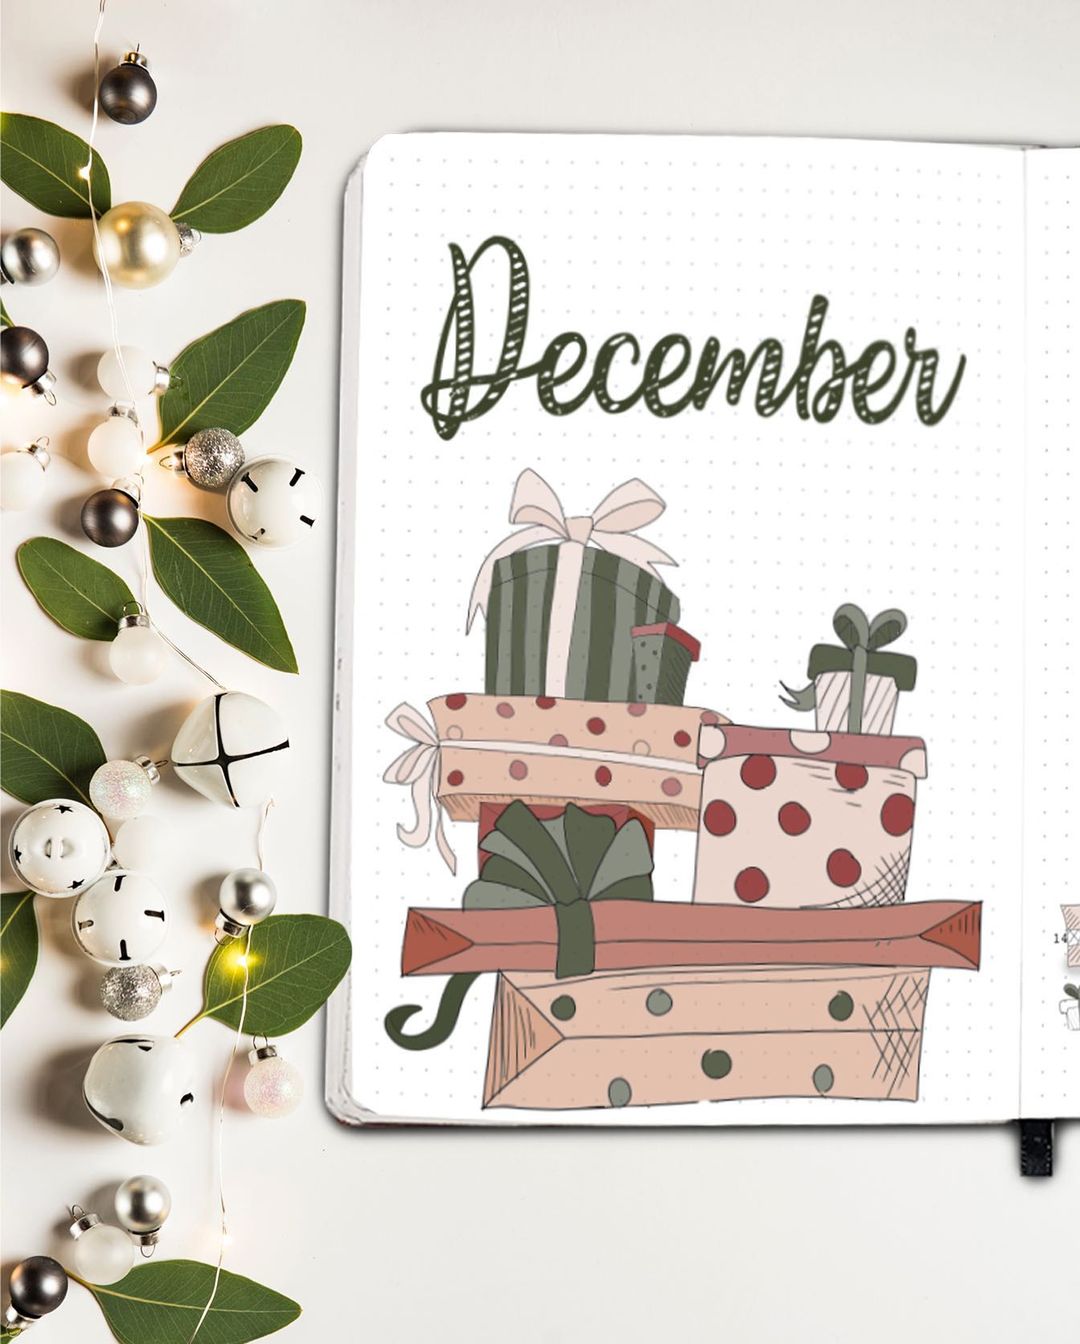 December cover page decorated with Christmas gifts